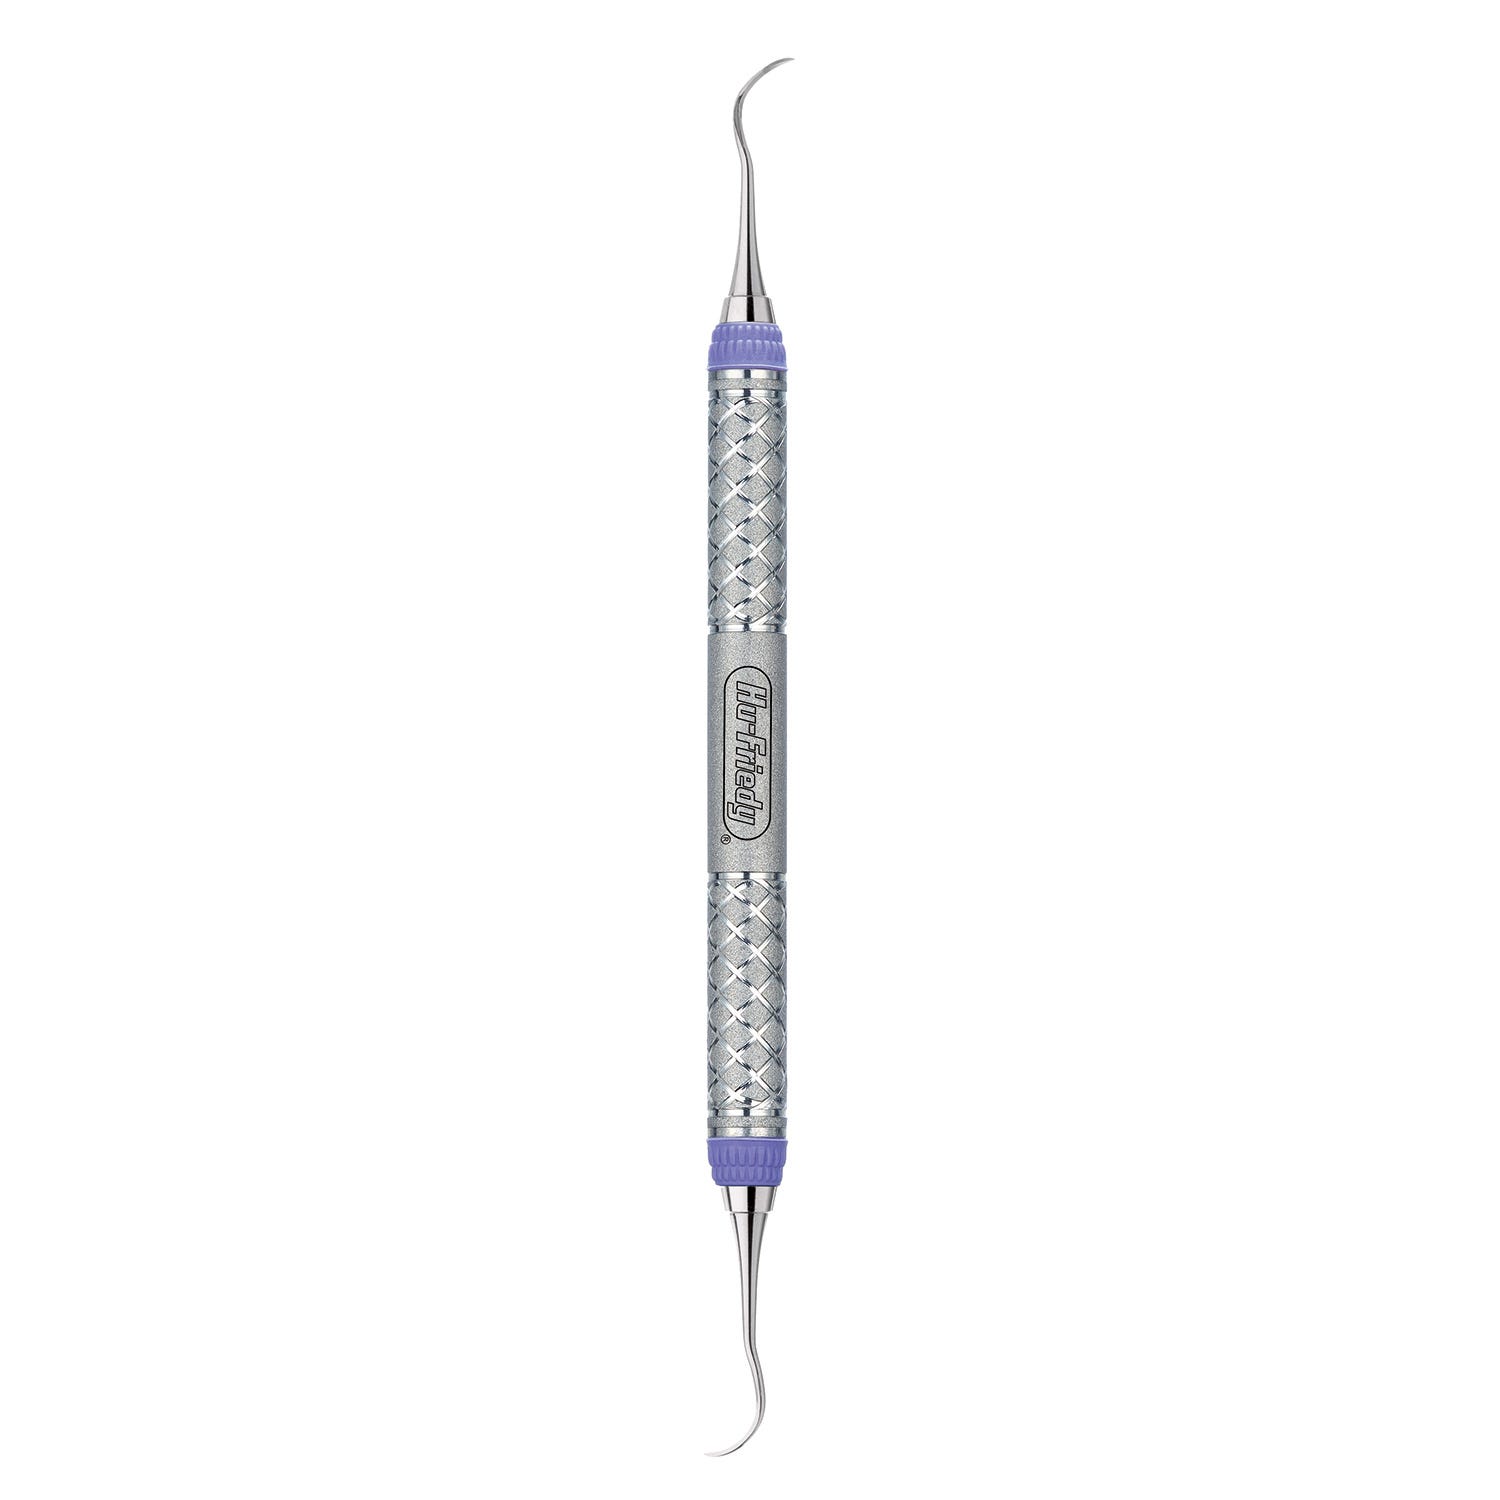 Scaler Nevi #4 Posterior Everedge 2.0 #9 Handle Double-Ended